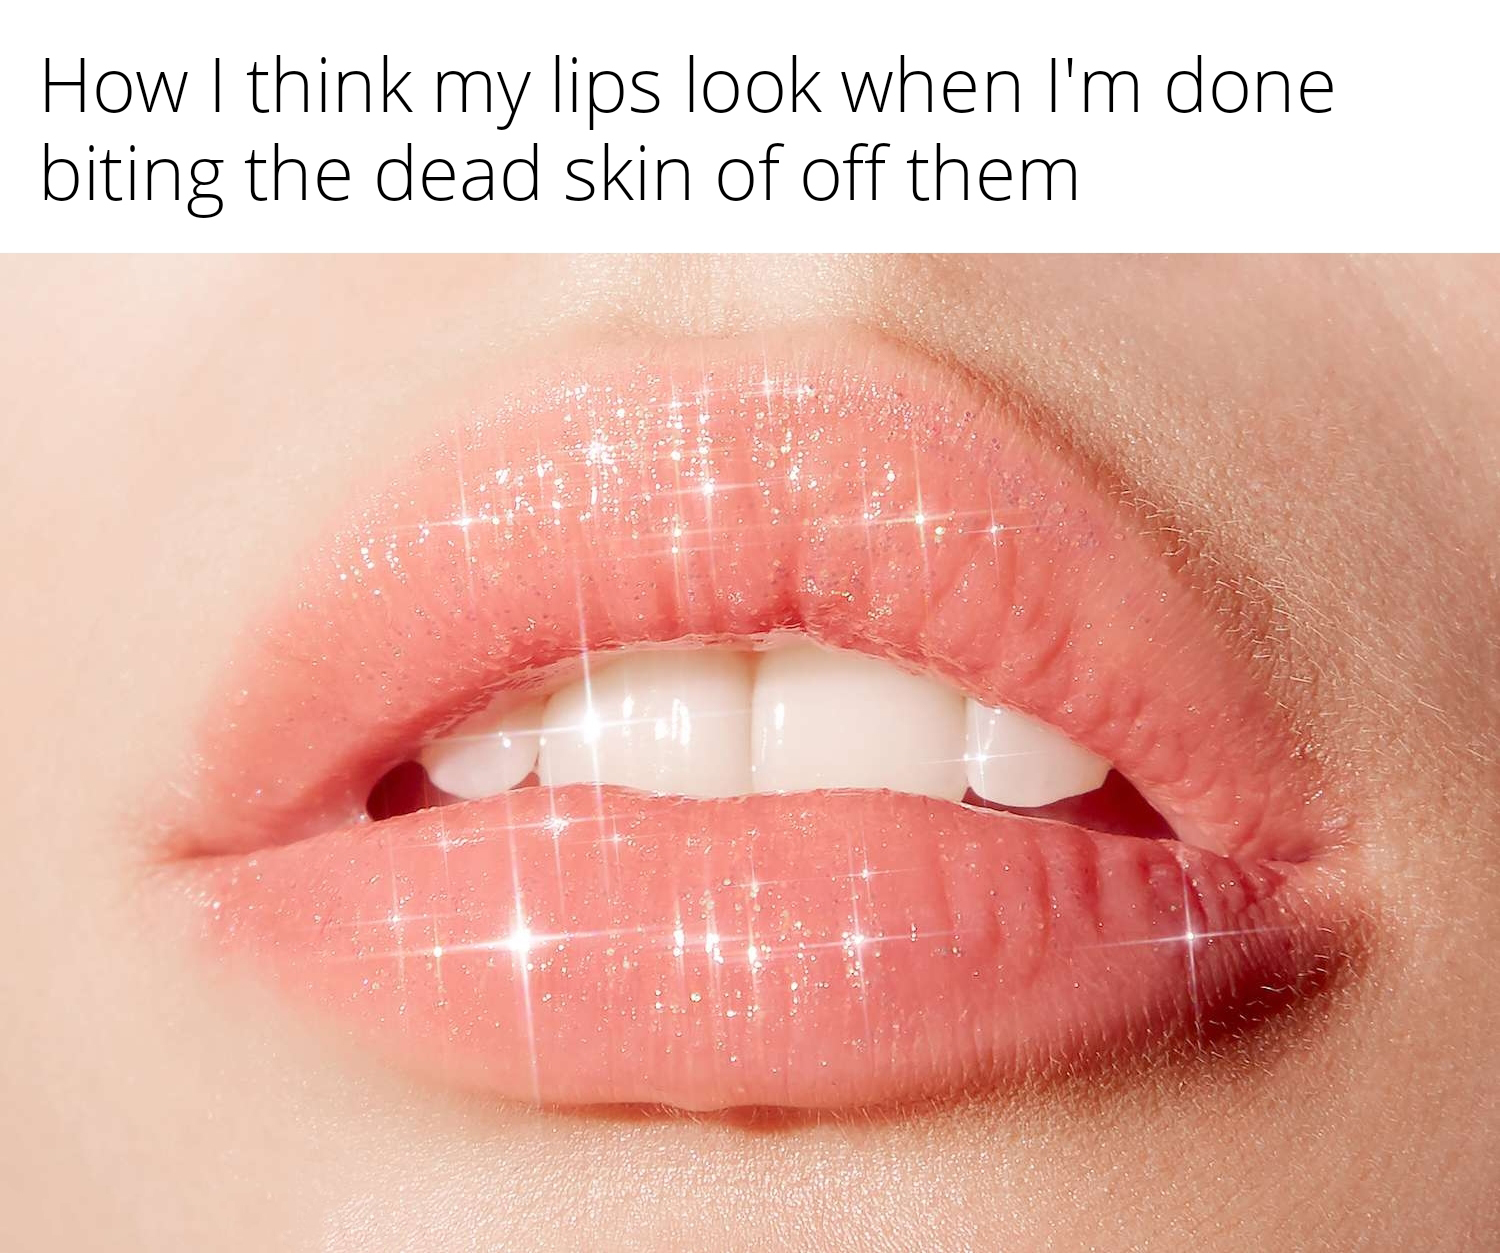 funny memes and pics - does lip balm do - How I think my lips look when I'm done biting the dead skin of off them